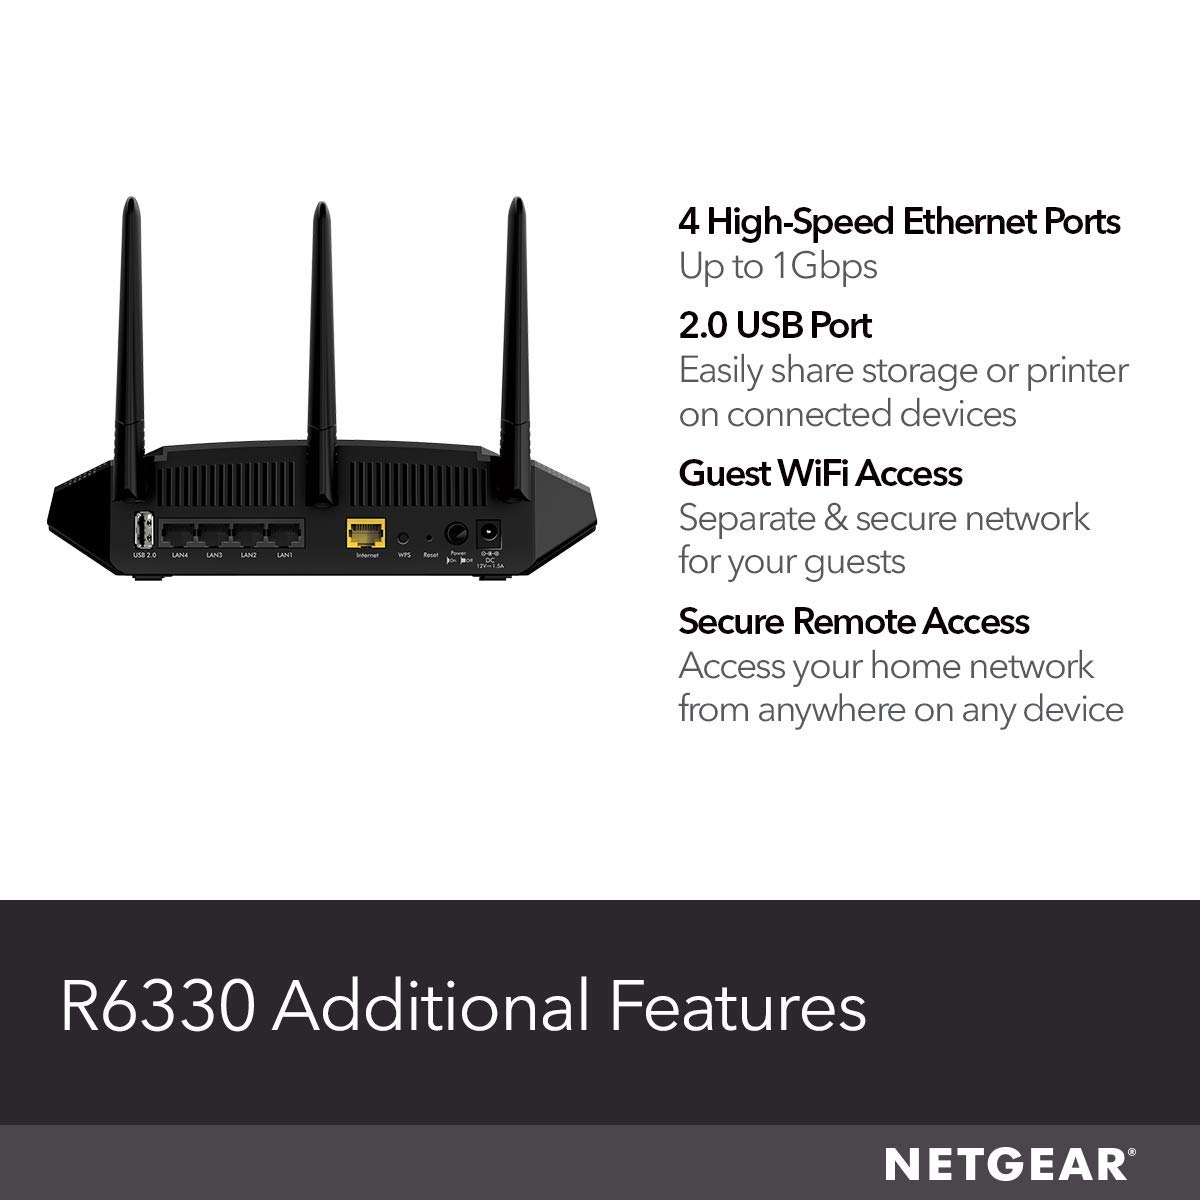 NETGEAR WiFi Router (R6330) - AC1600 Dual Band Wireless Speed (up to 1600 Mbps) | Up to 1200 sq ft Coverage & 20 Devices | 4 x 1G Ethernet and 1 x 2.0 USB Ports (R6330-1AZNAS)